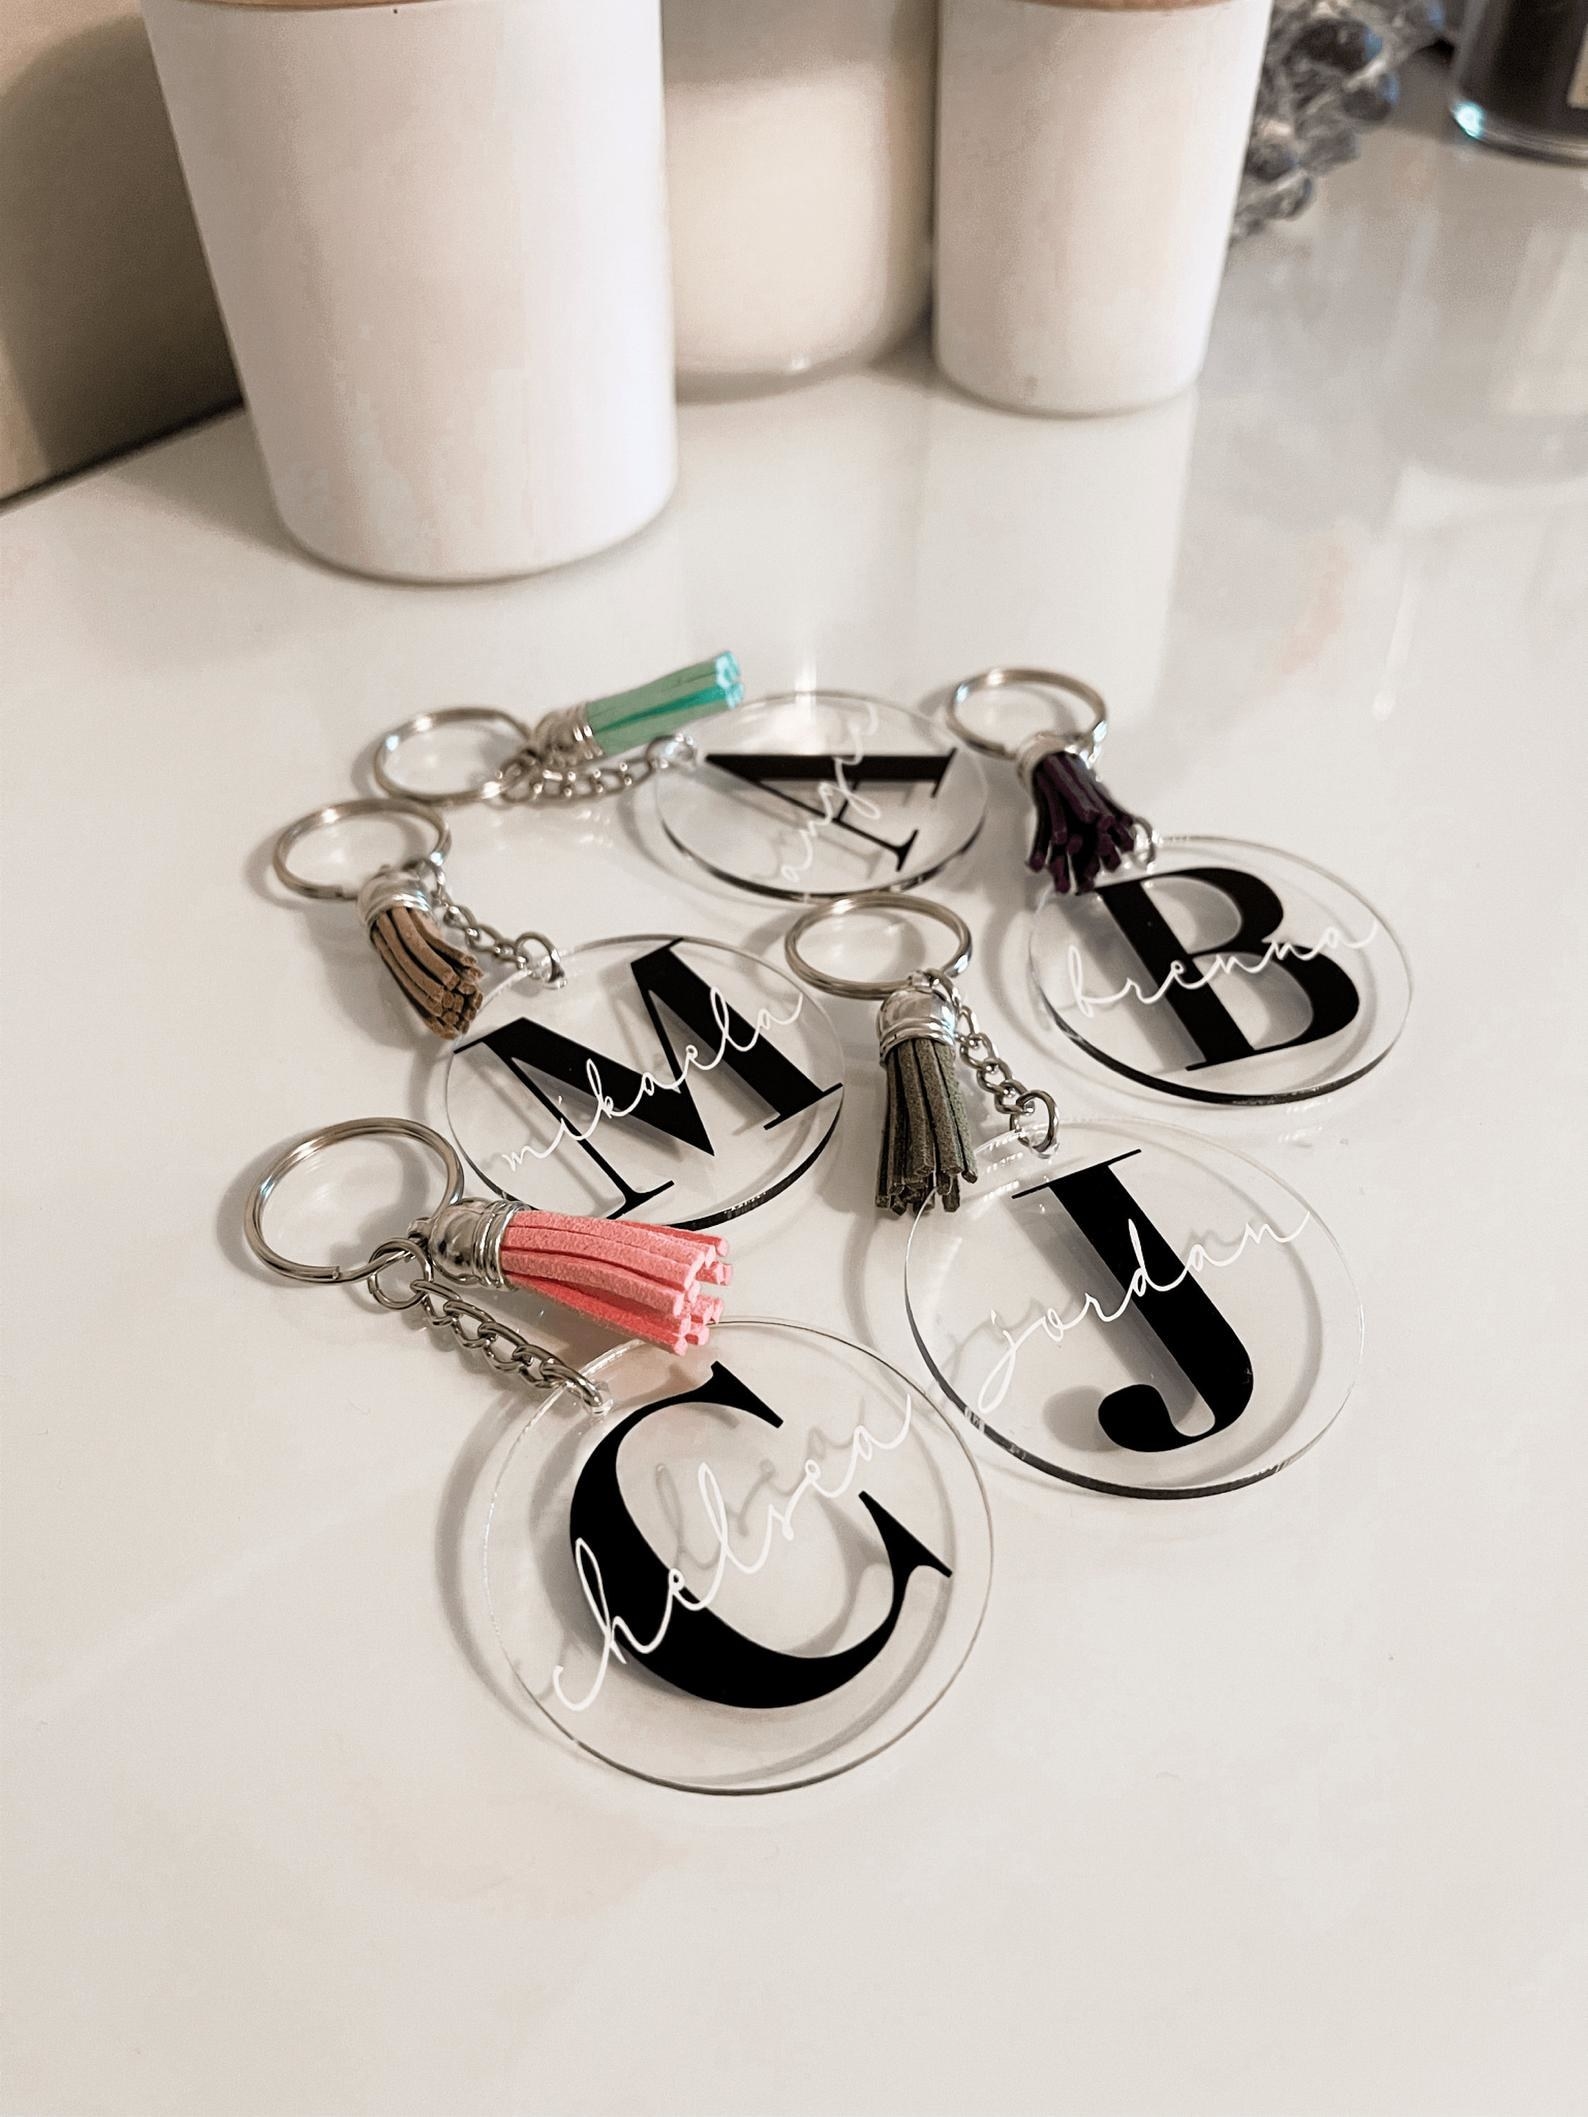 a set of the keychains on a table